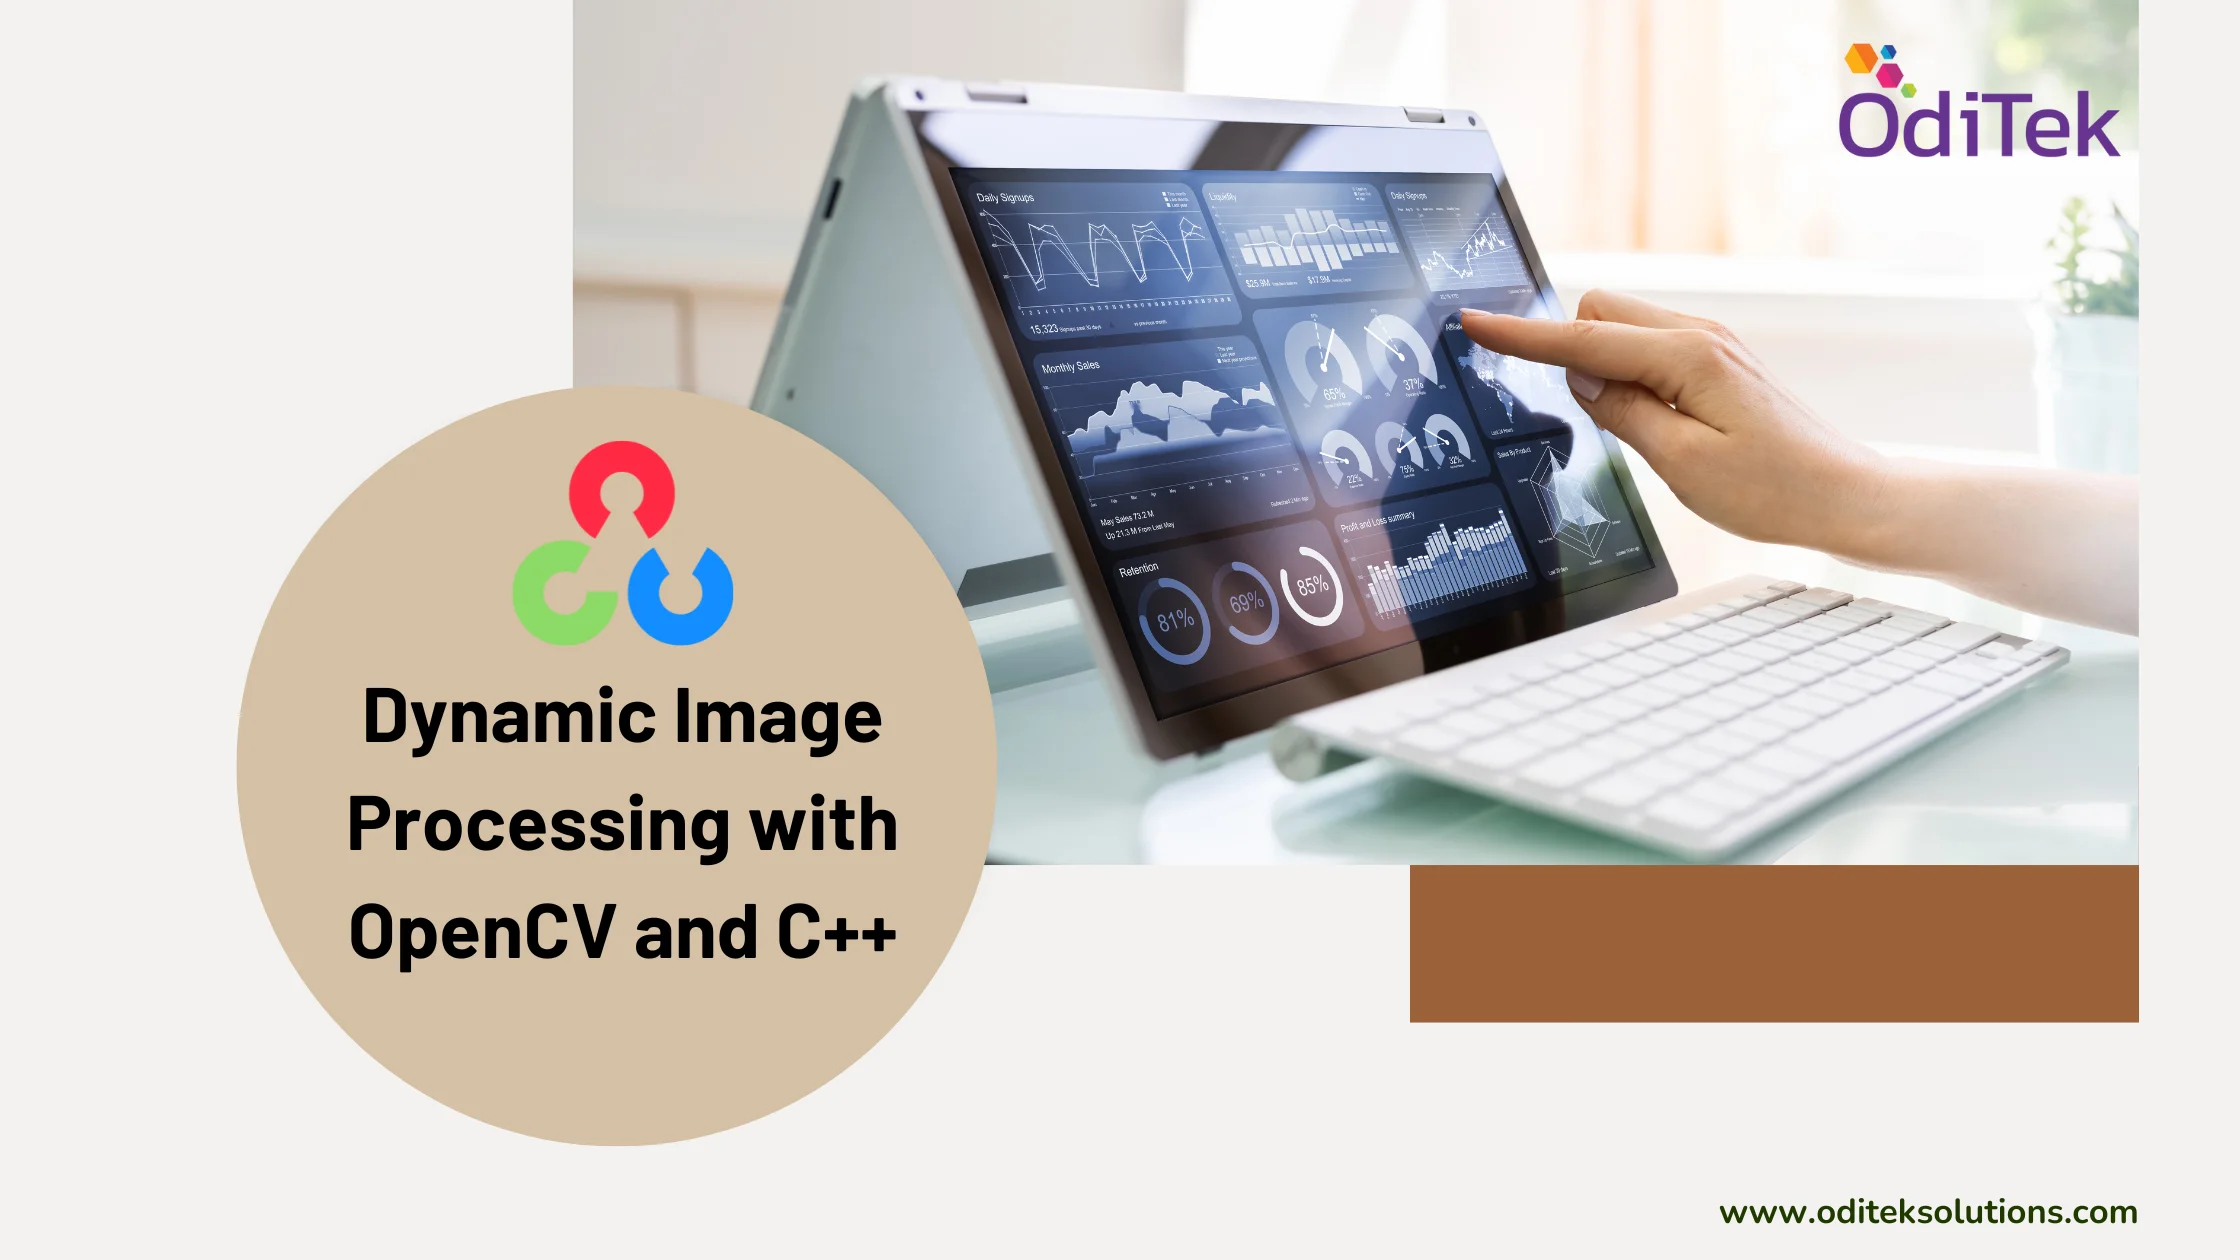 OpenCV image processing